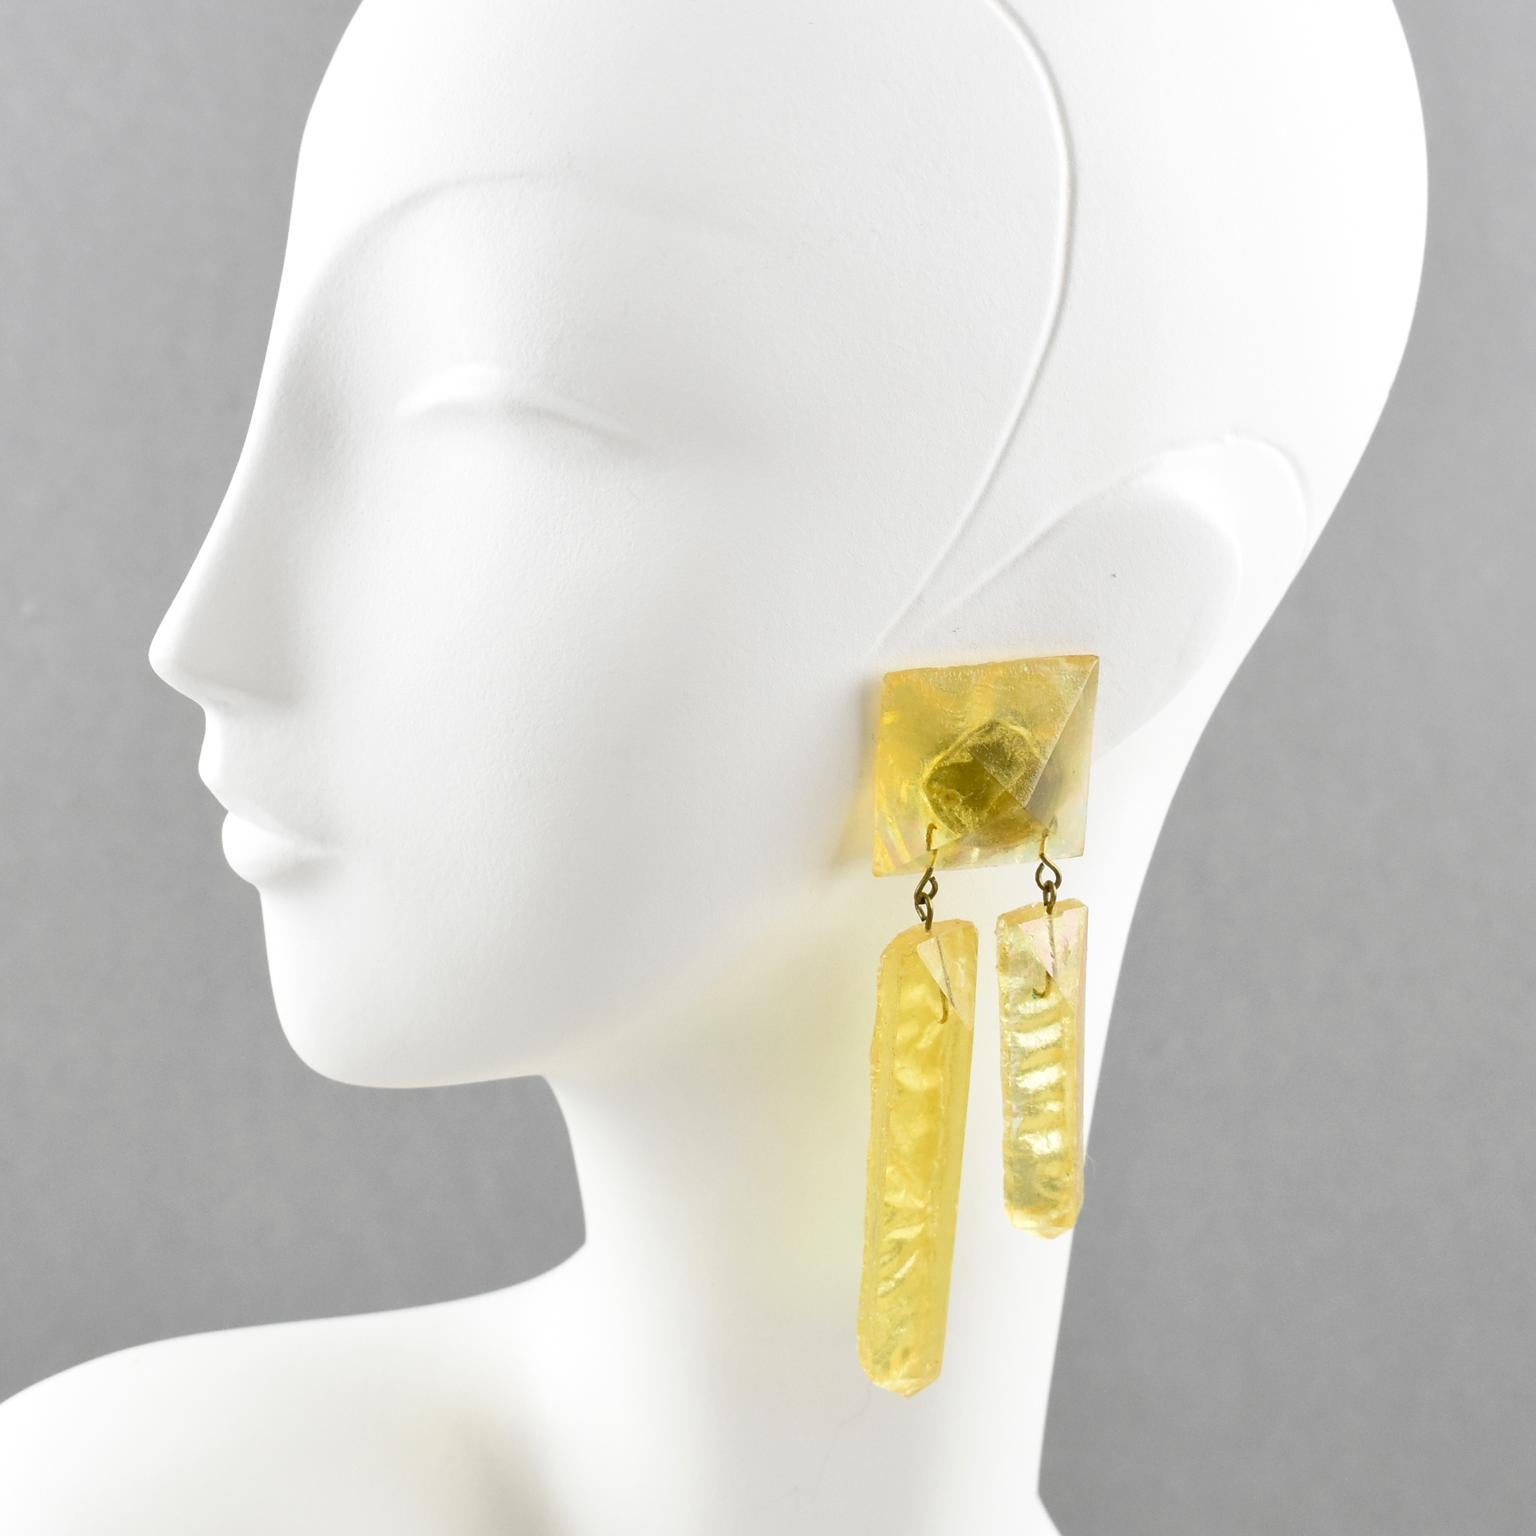 These stunning oversized carved Lucite clip-on earrings feature a dimensional dangling shape with raw textured carved ice cubes in luminous transparent pearlized yellow color. This design is very unusual. There is no visible maker's